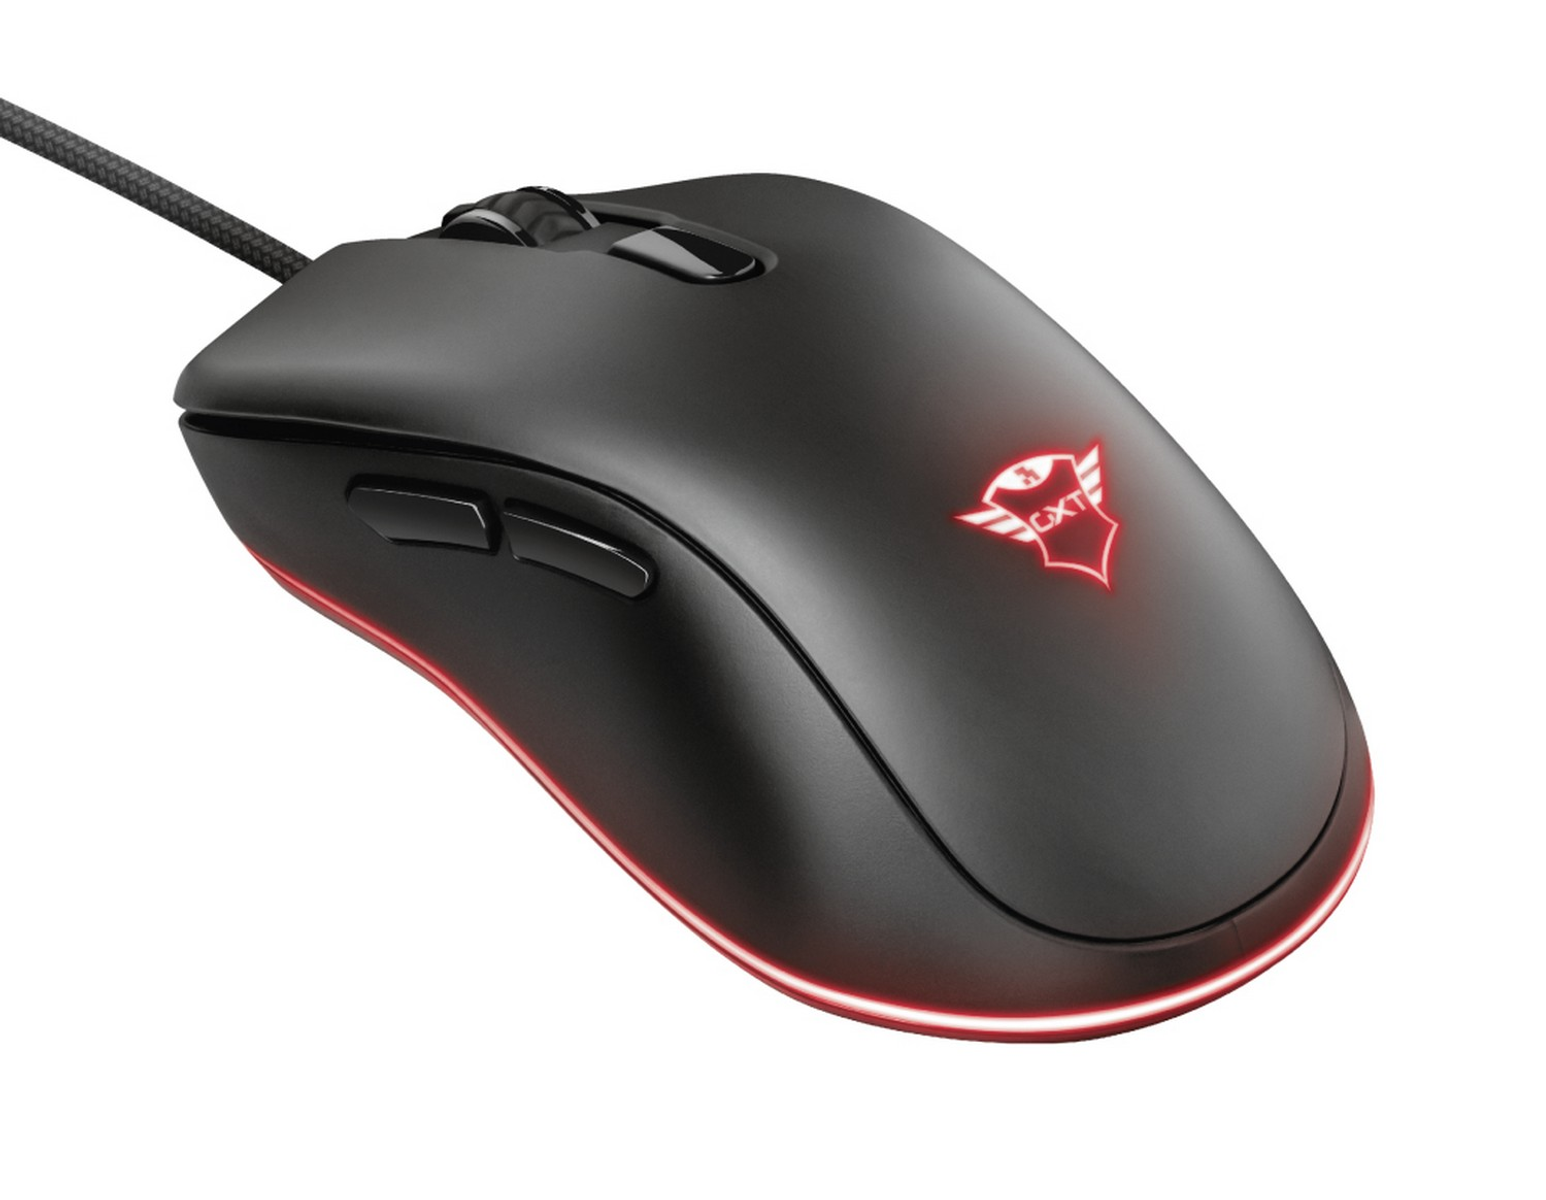 MOUSE TRUST GAMING GXT 930 RGB JACX Schwarz Gaming 23575 Maus,